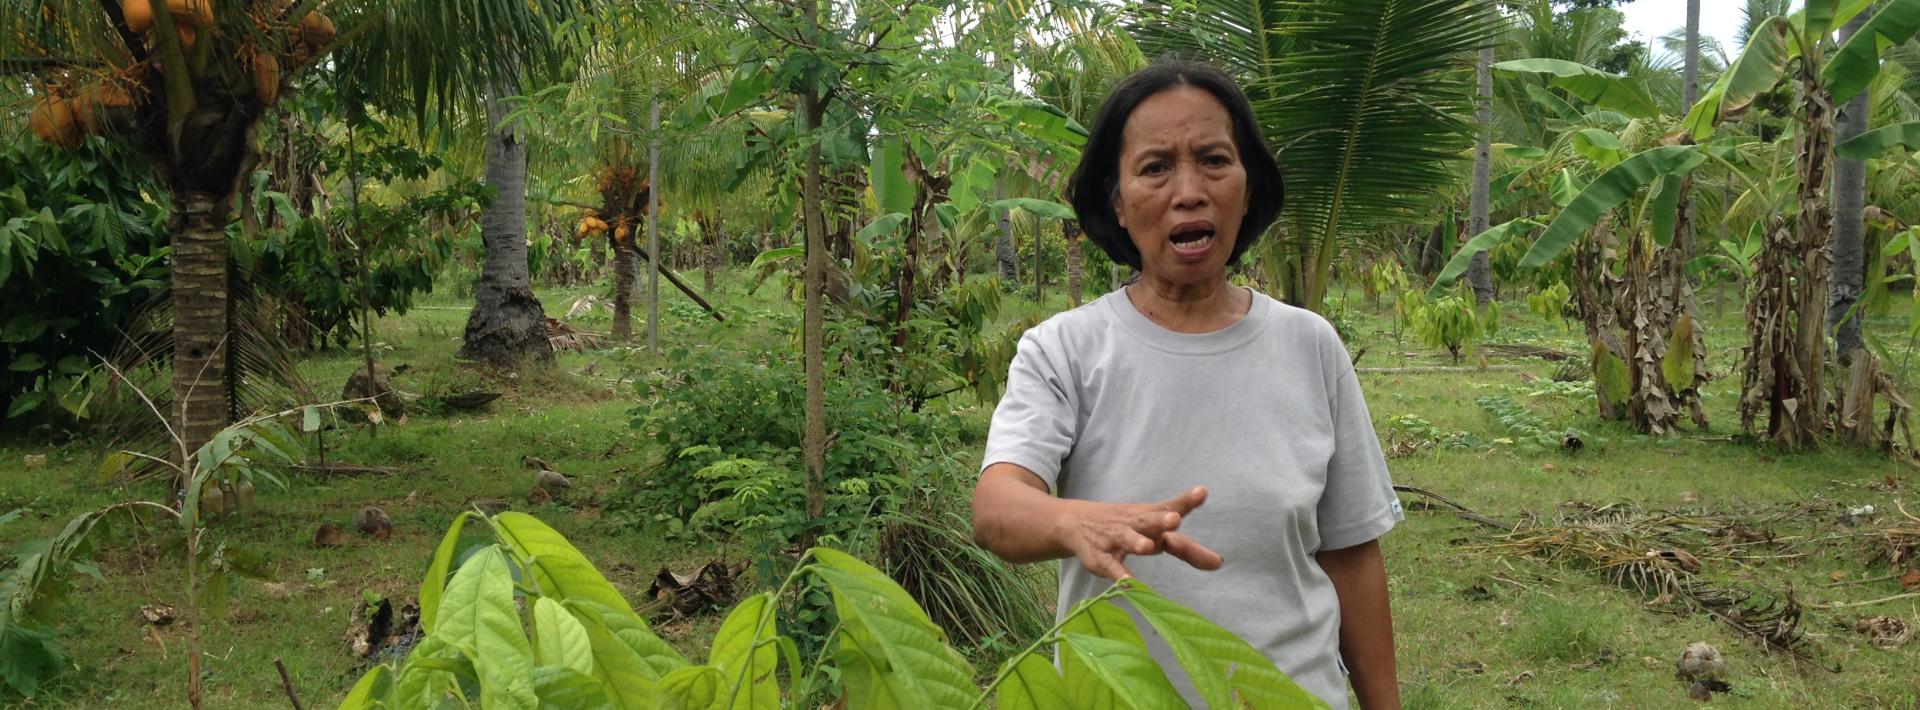 Part 2: Romancing storms, worms and leaves; growing tobacco in the shadow of environmental perils in the Philippines